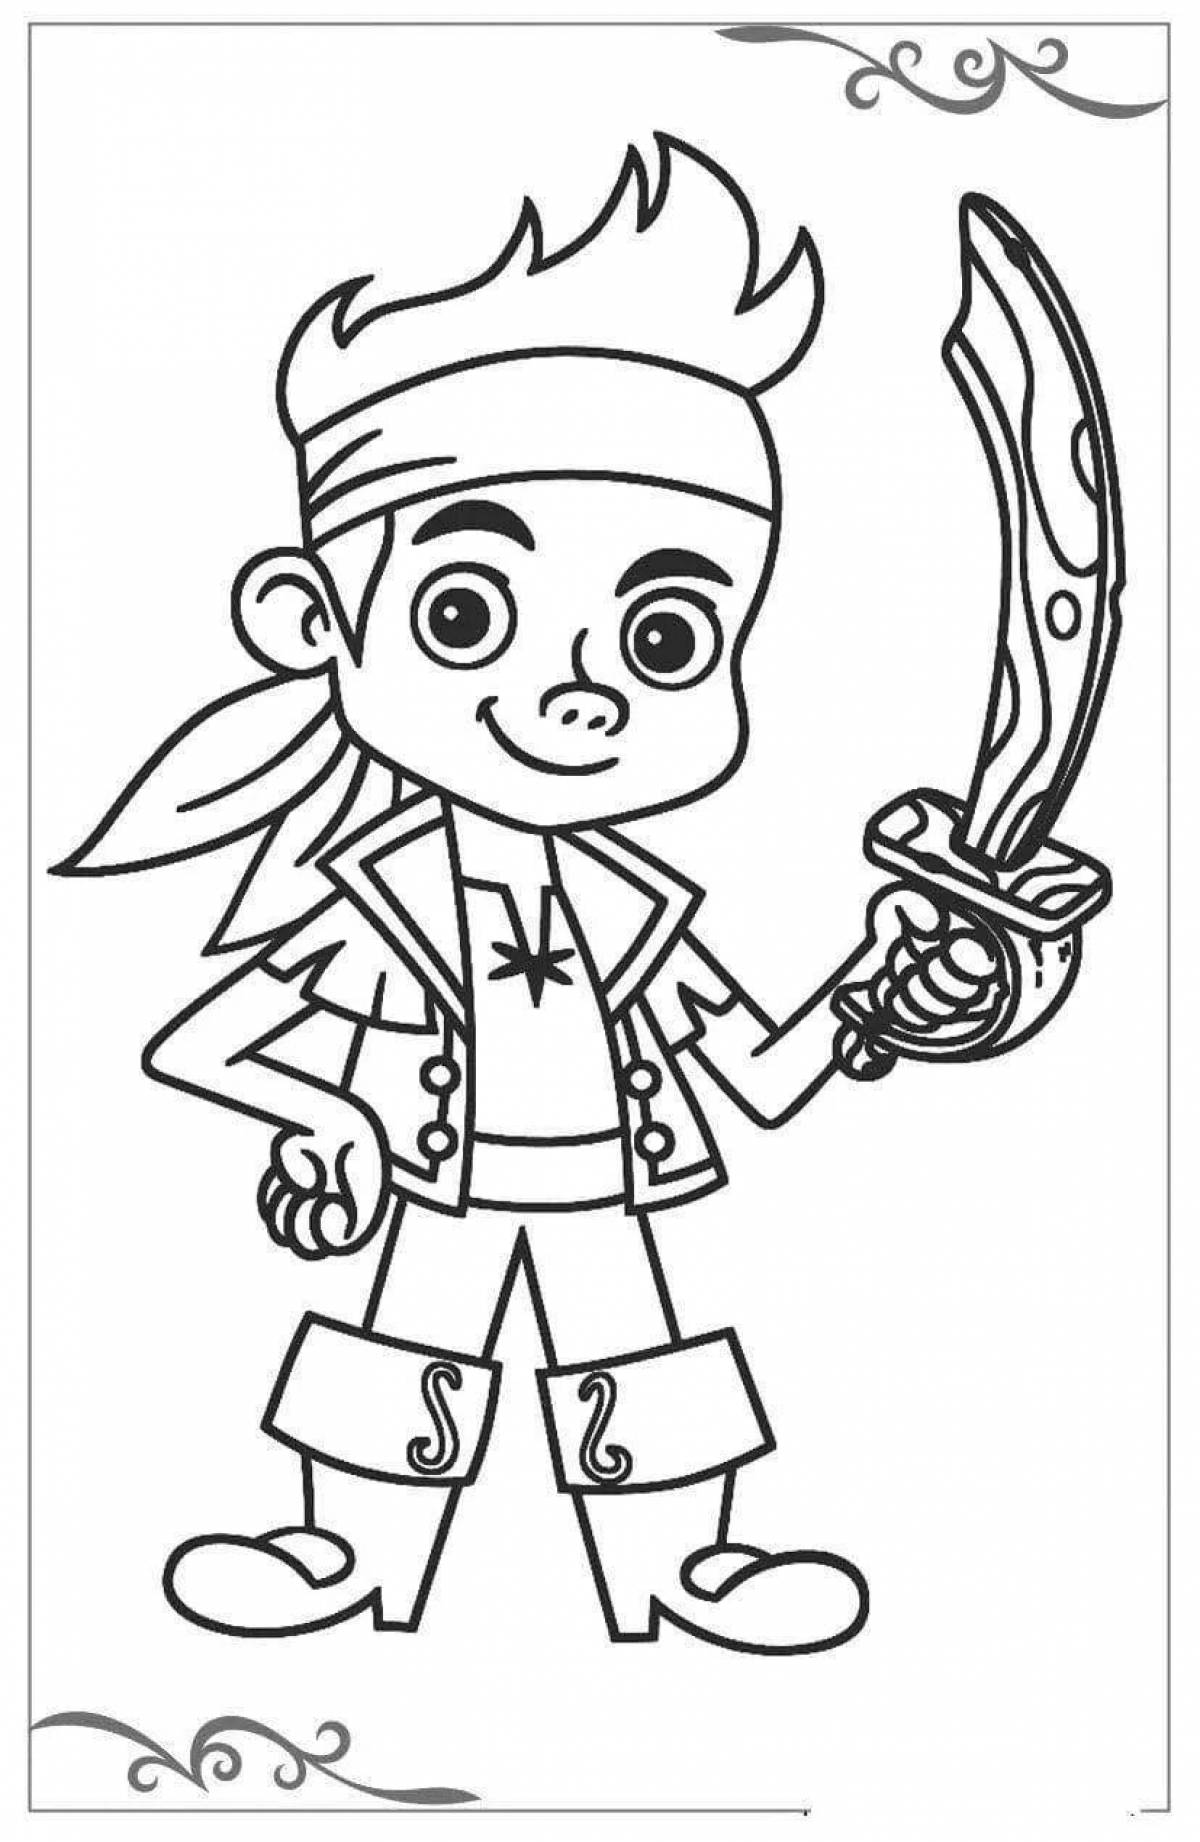 Fabulous pirate coloring book for kids